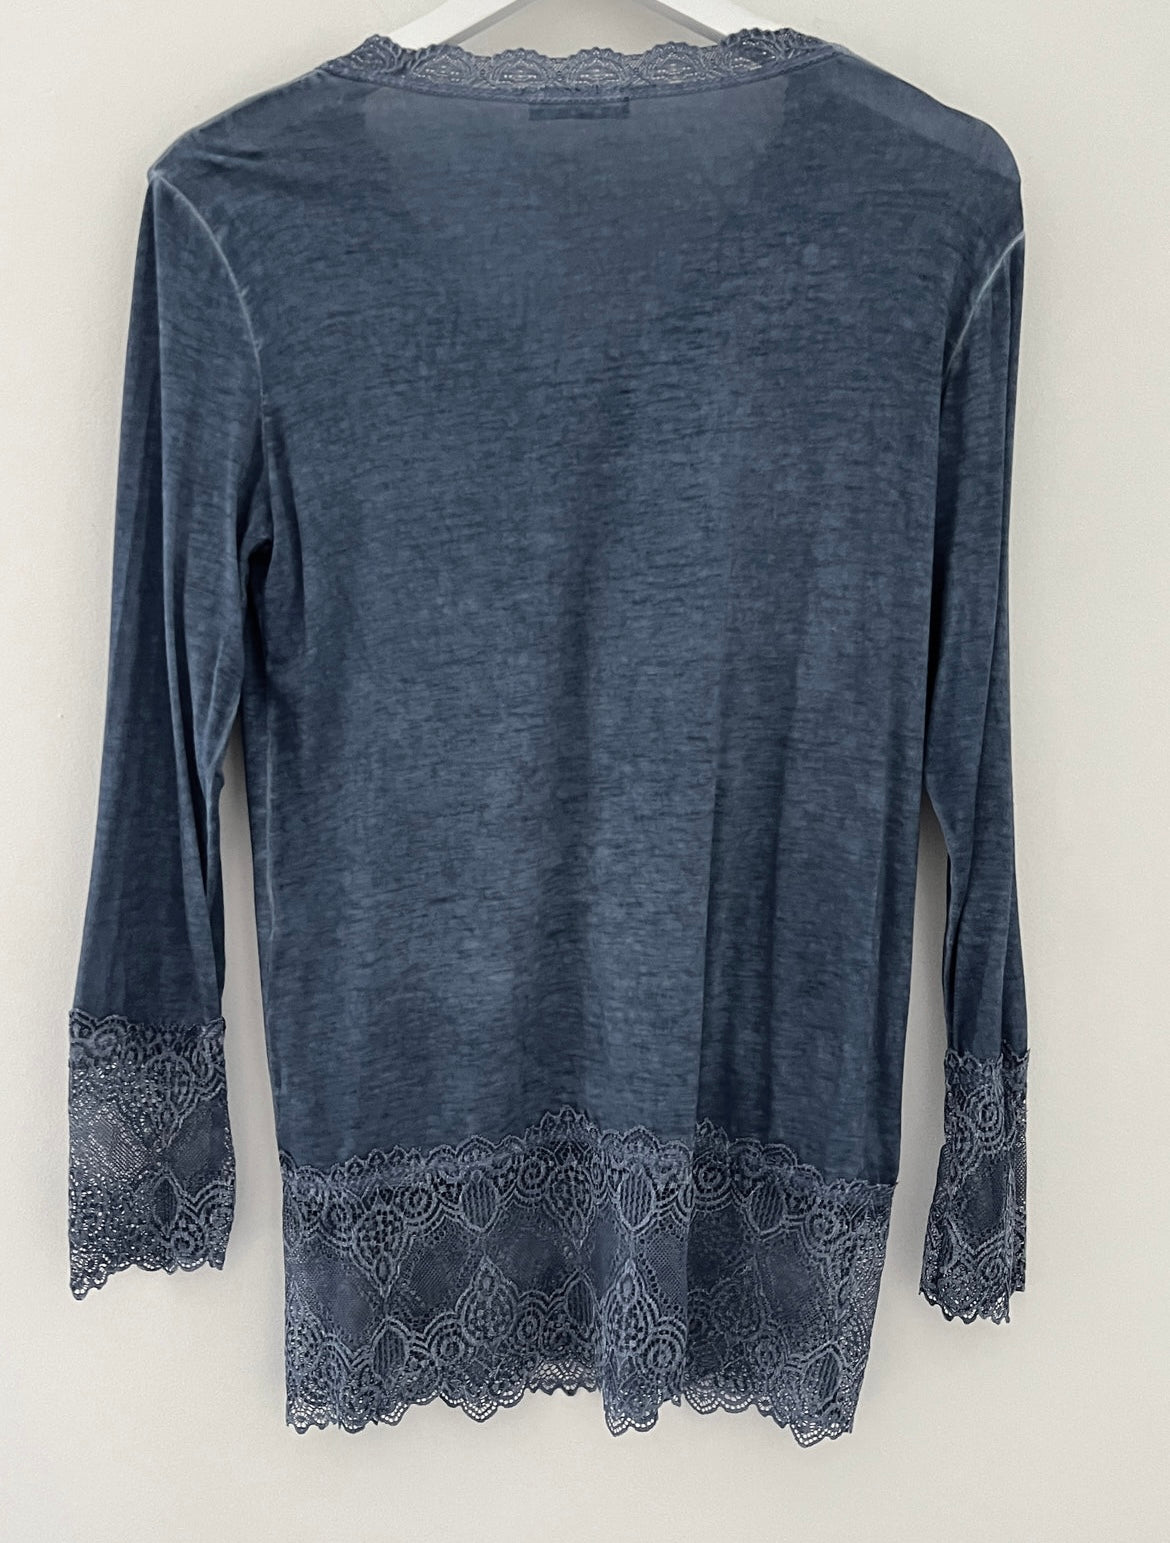 Luxe Base Top with Lace Trim in Denim Blue